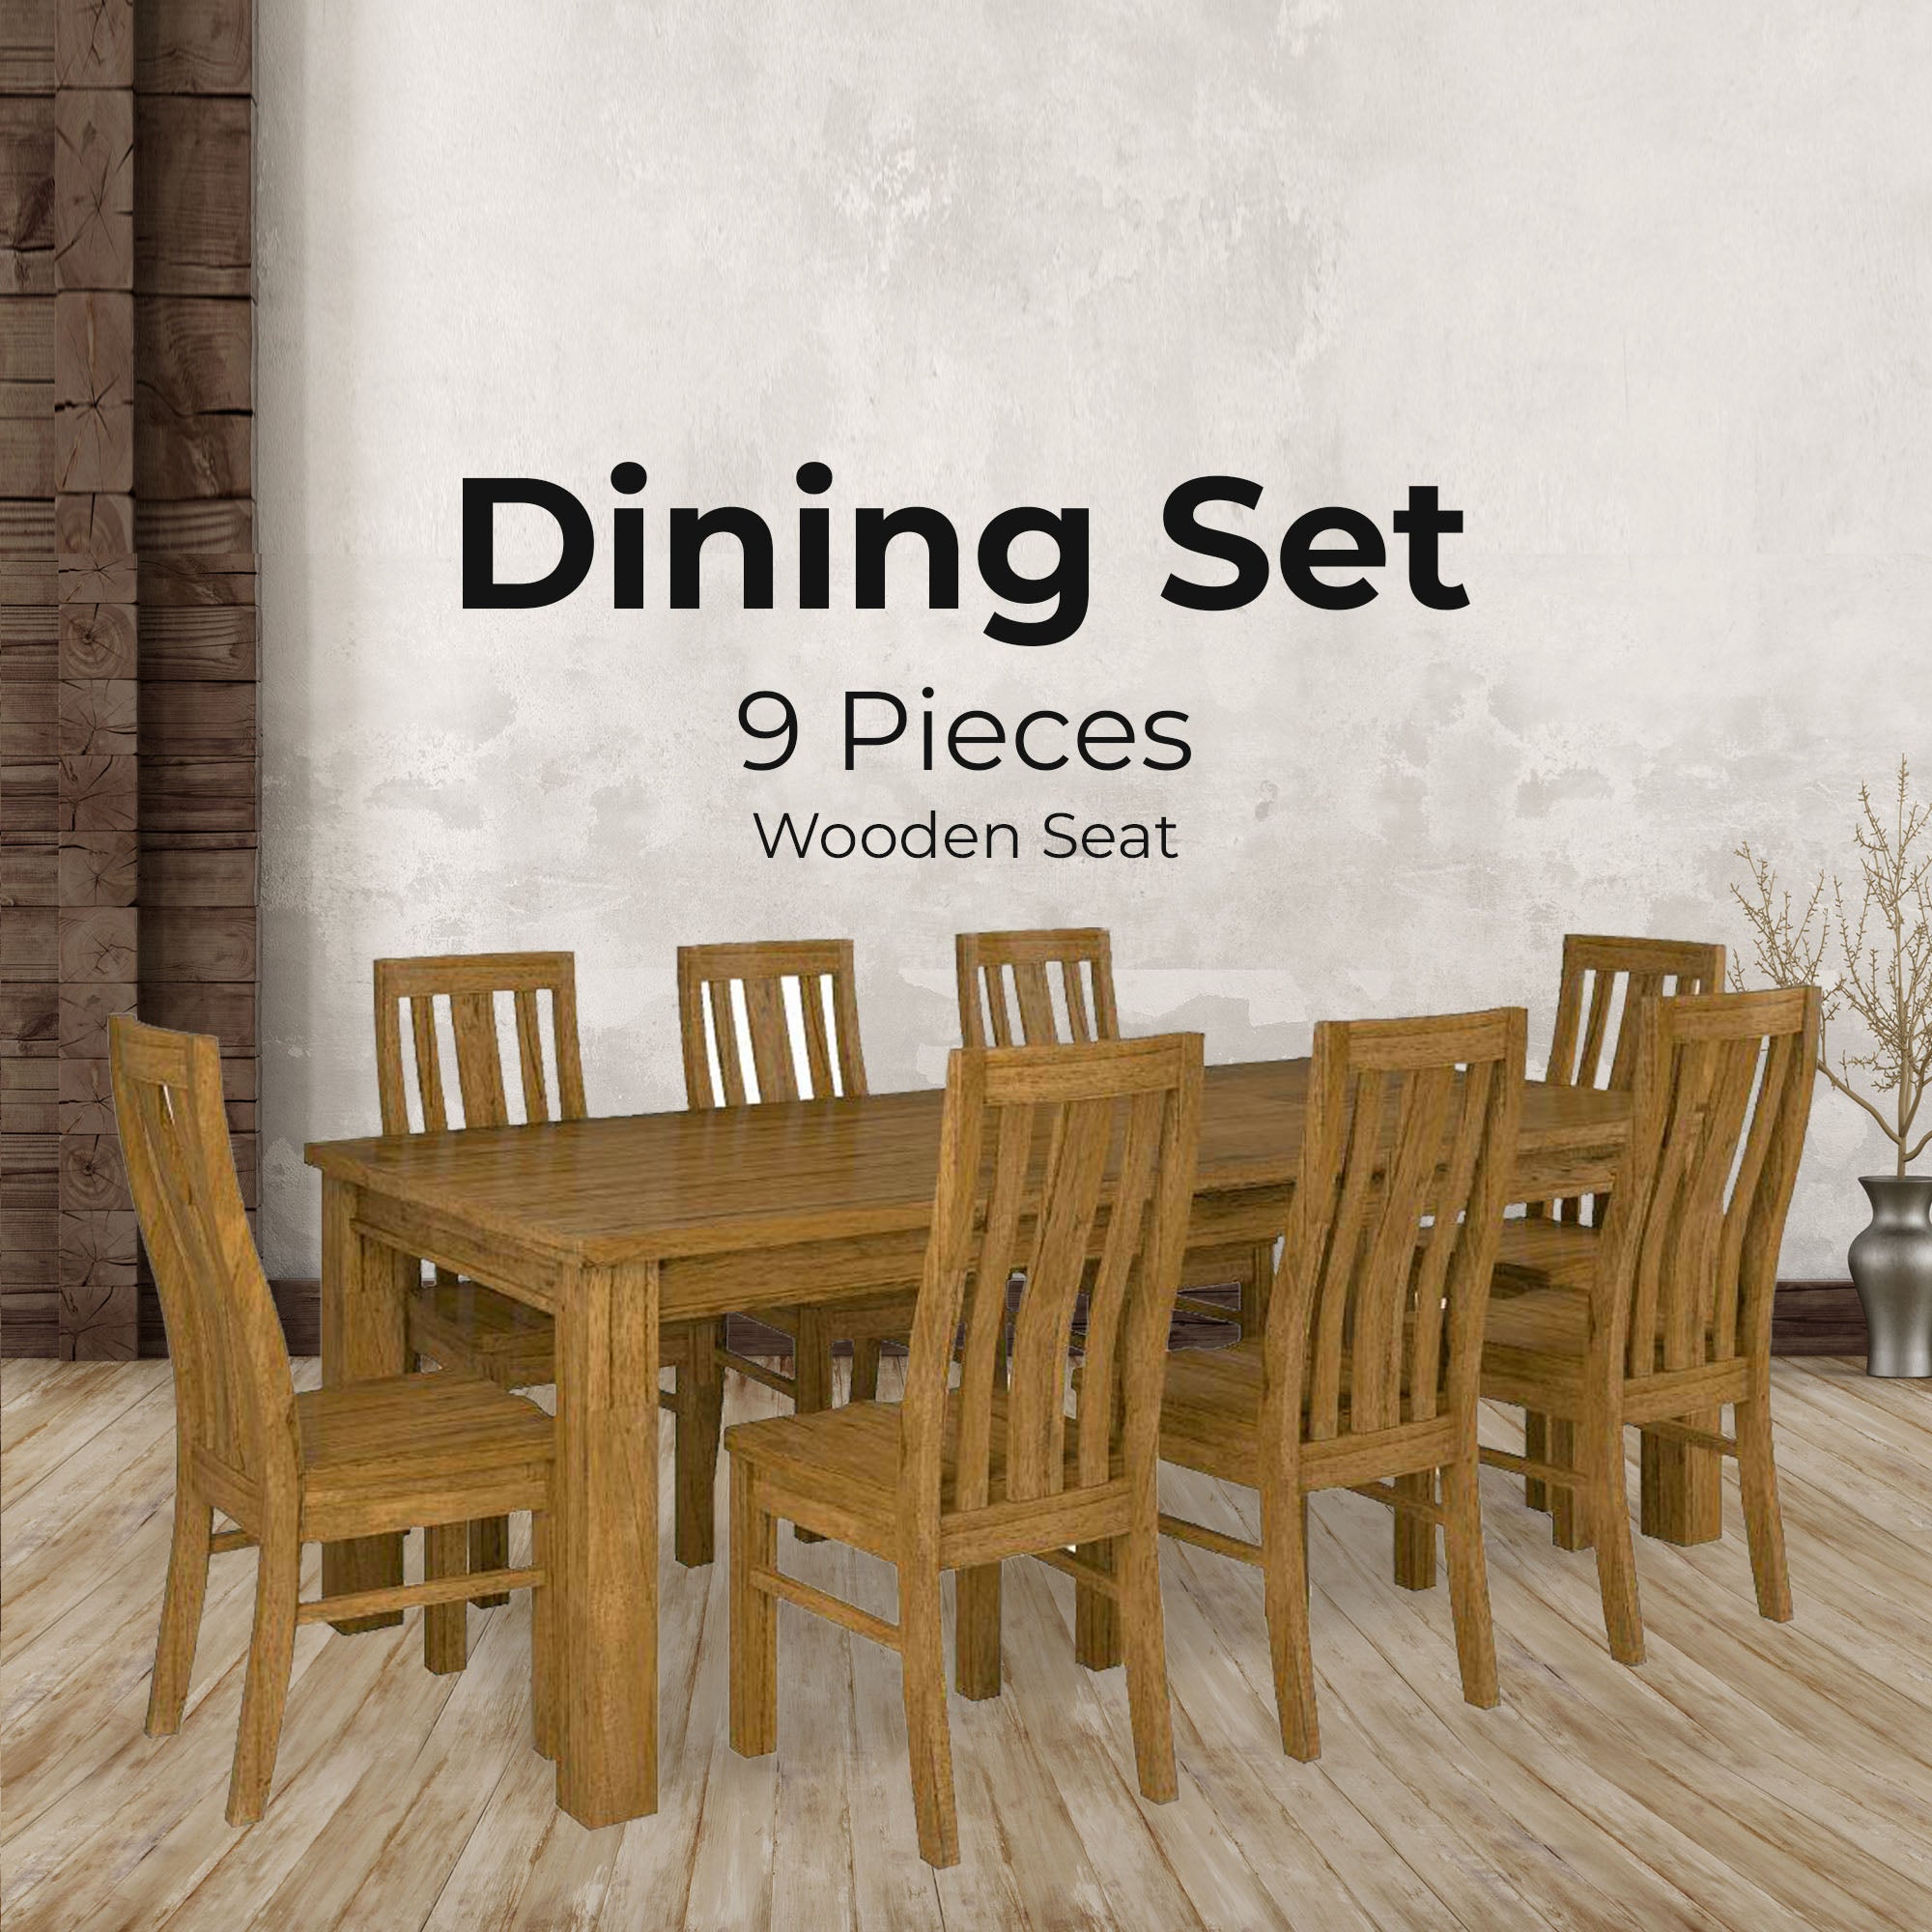 Birdsville 9pc Dining Set 225cm Table 8 Chair Solid Mt Ash Wood Timber - Brown - SILBERSHELL